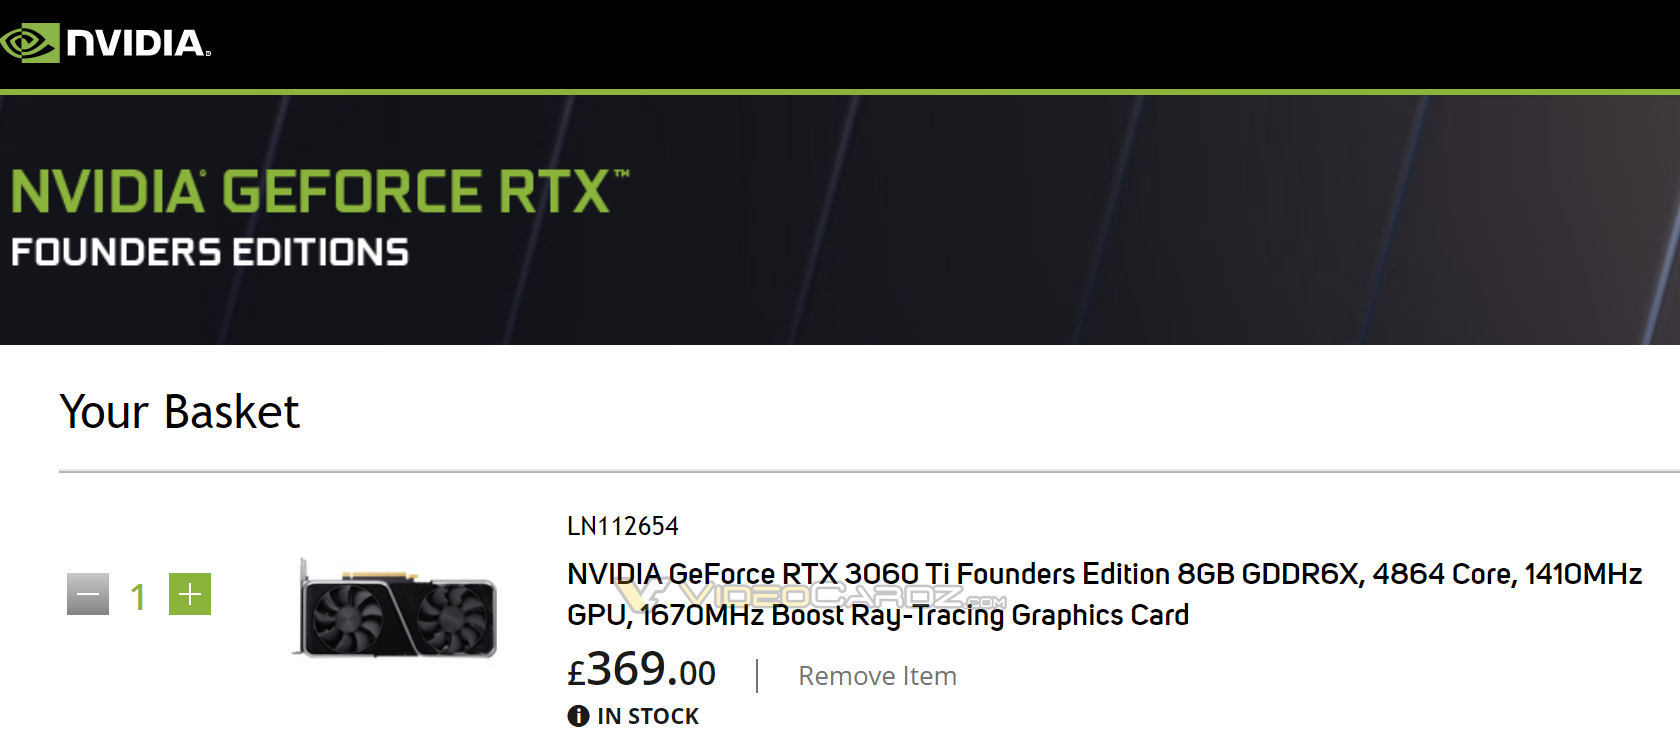 NVIDIA GeForce RTX 3060 has now been listed with GDDR6X memory as well 